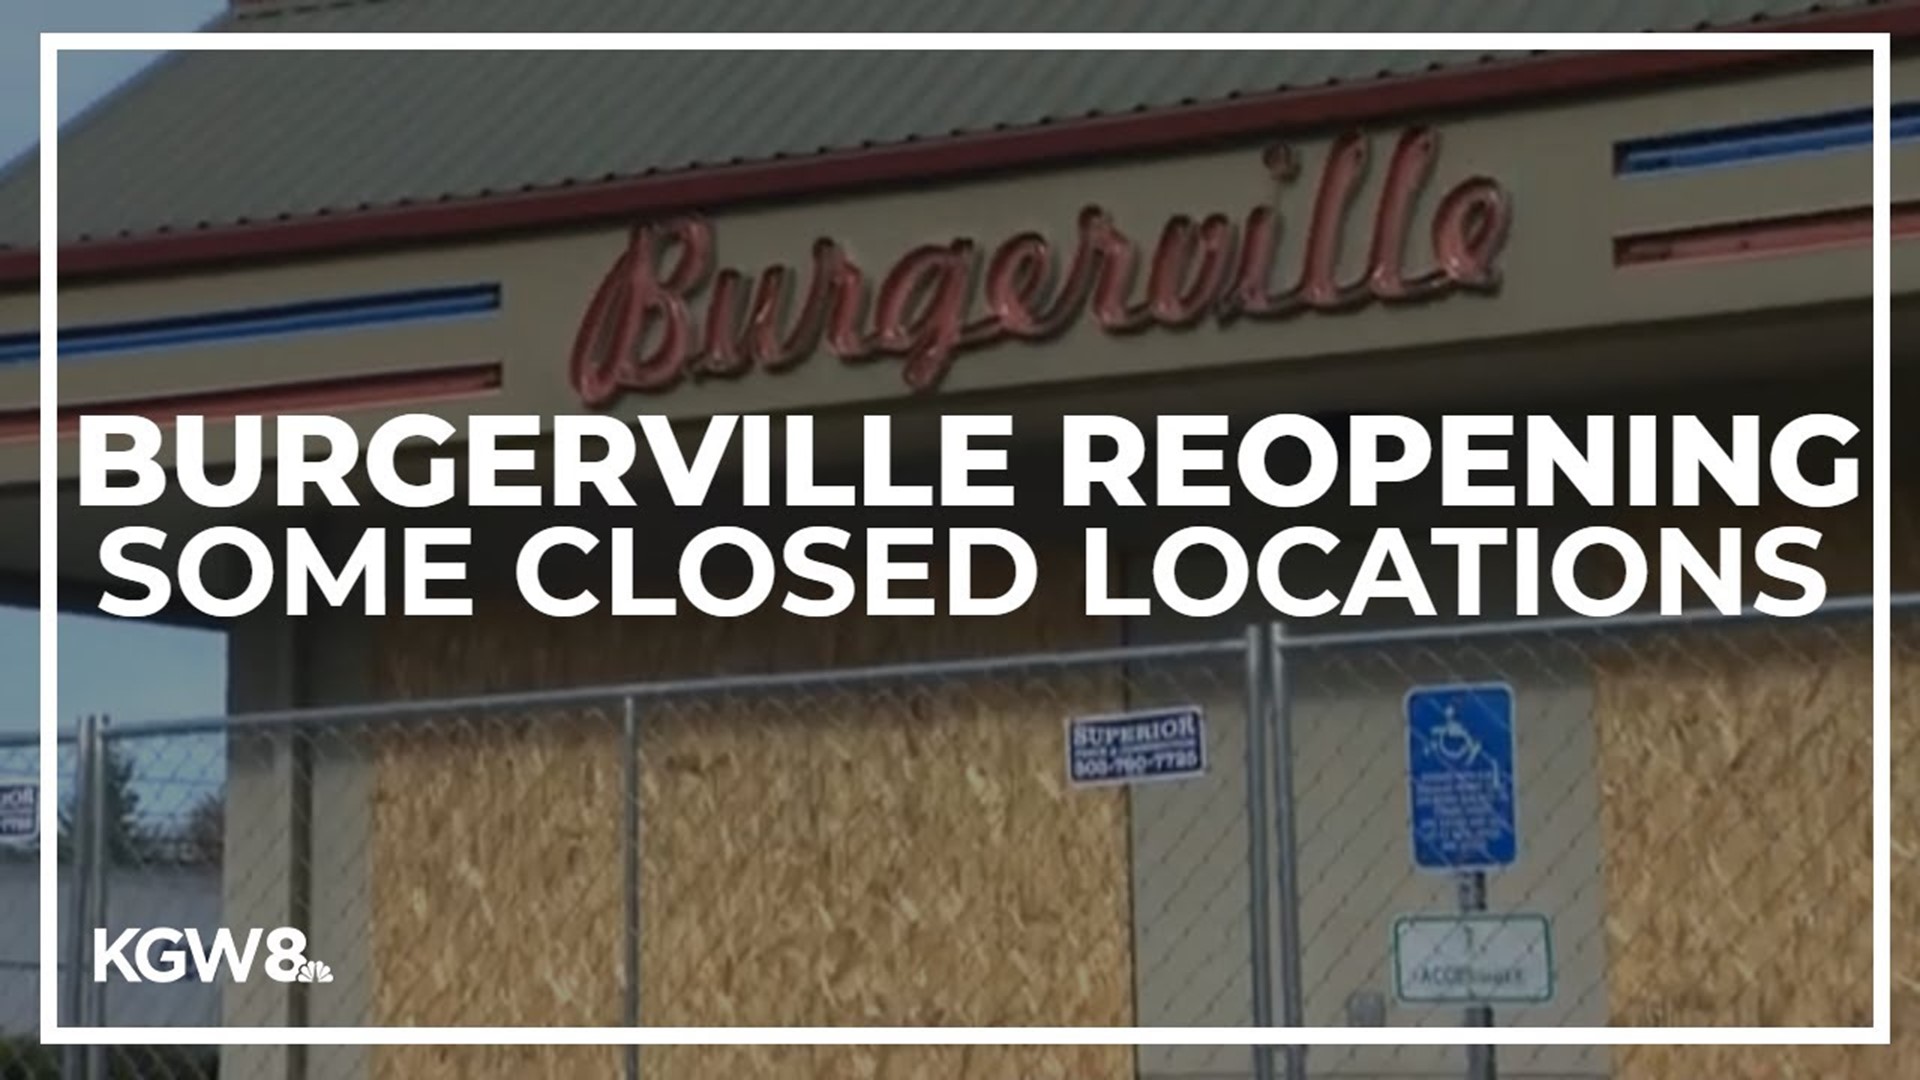 Vancouver-based Burgerville is reopening two of five closed restaurants on Monday, Nov. 22, with hopes the other three will open follow by year's end.